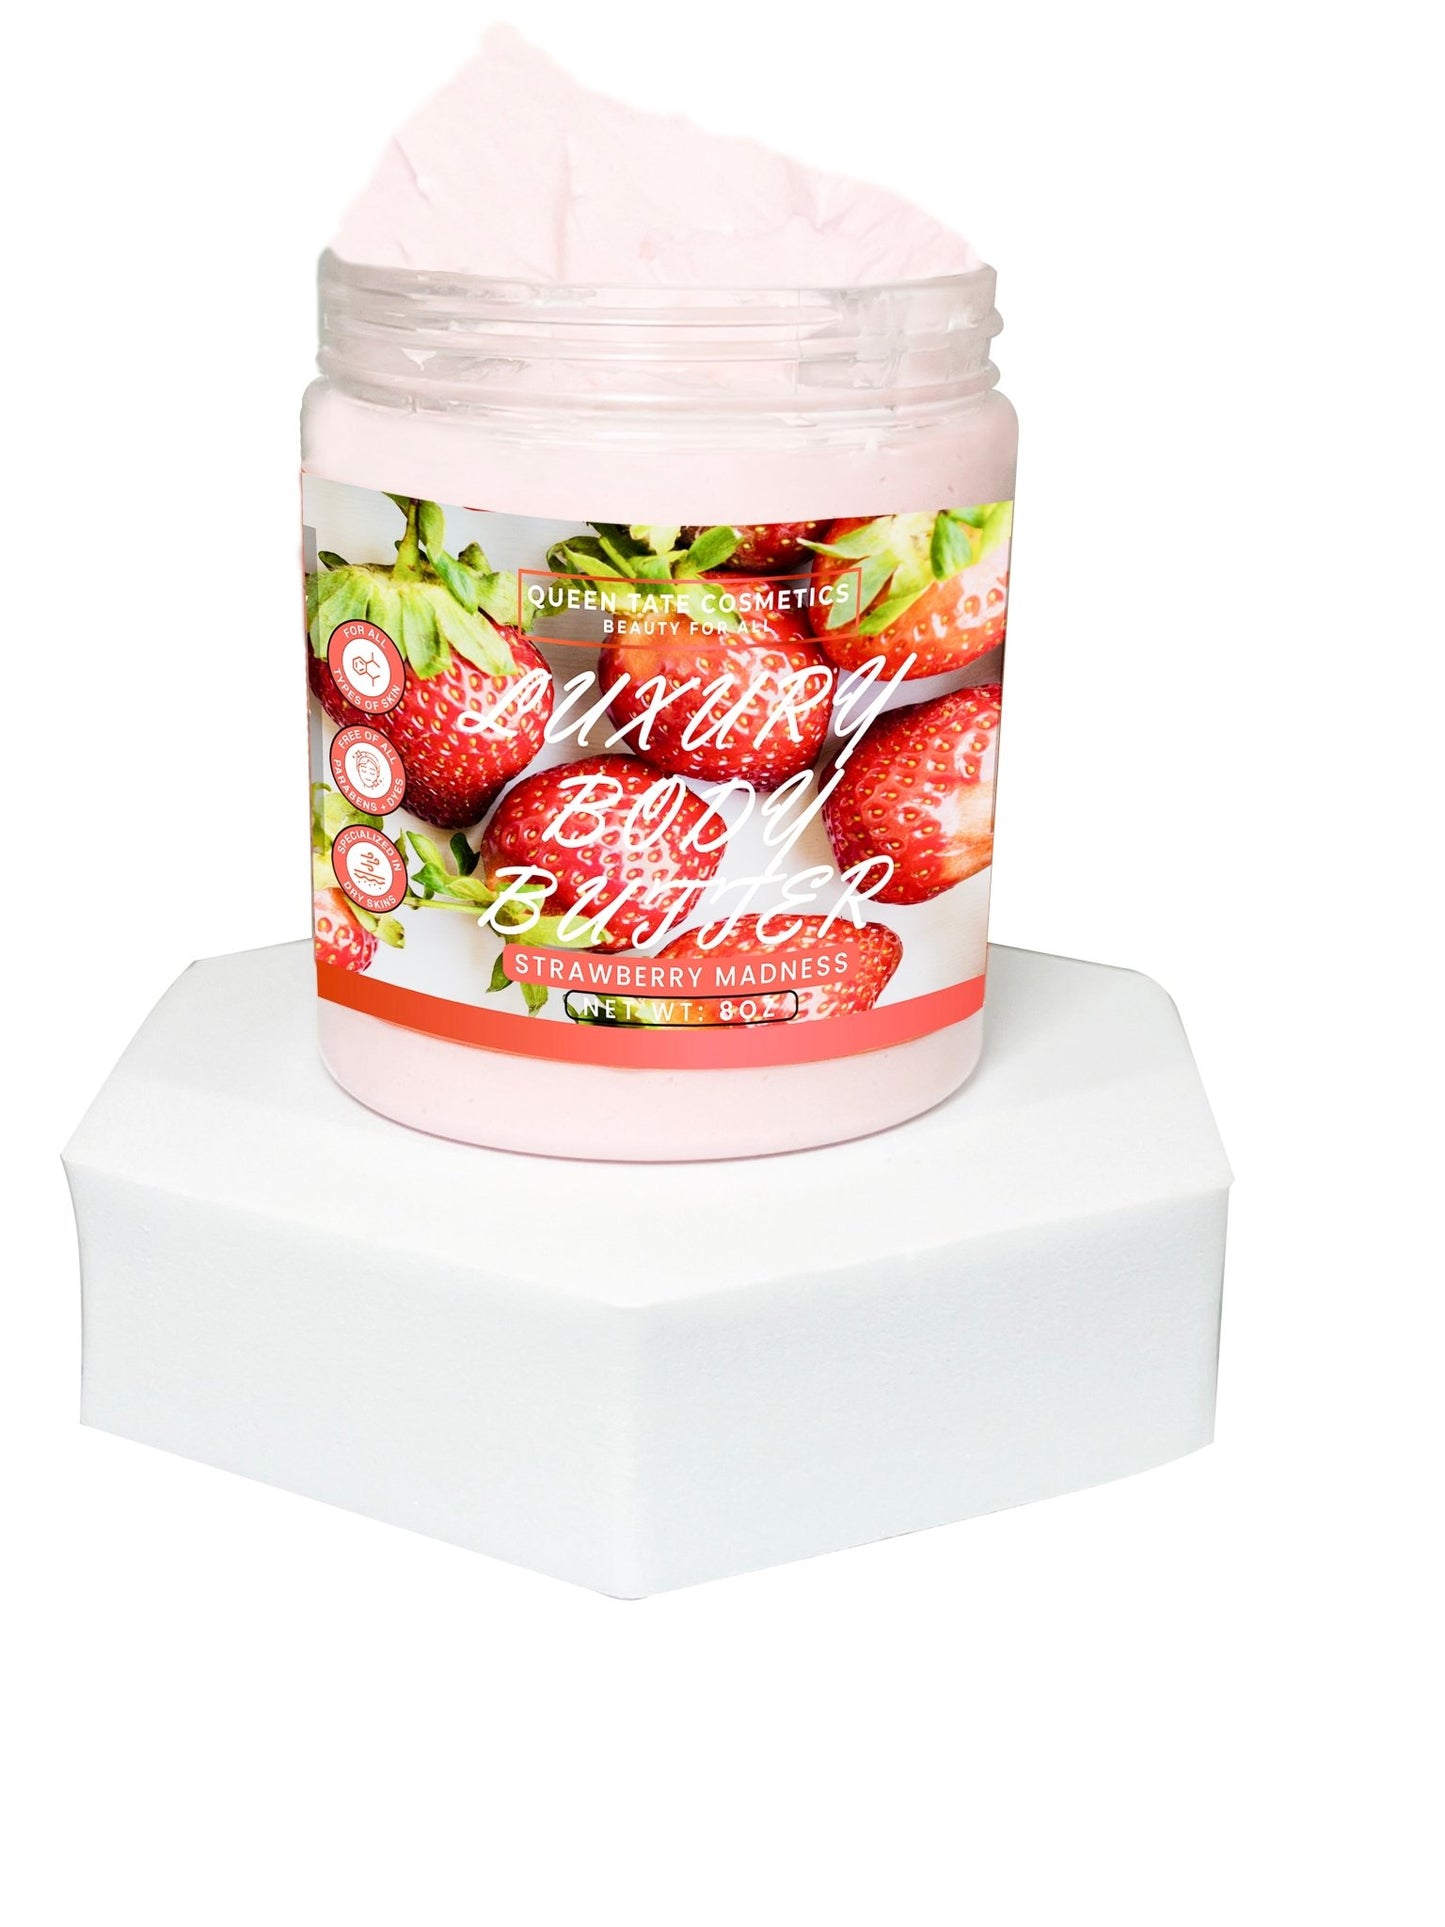 Strawberry Madness-Handcrafted Body Butter - Queen Tate CosmeticsHandcrafted Luxury Body ButterStrawberry Madness-Handcrafted Body ButterHandcrafted Luxury Body ButterQueen Tate Cosmetics 8 oz